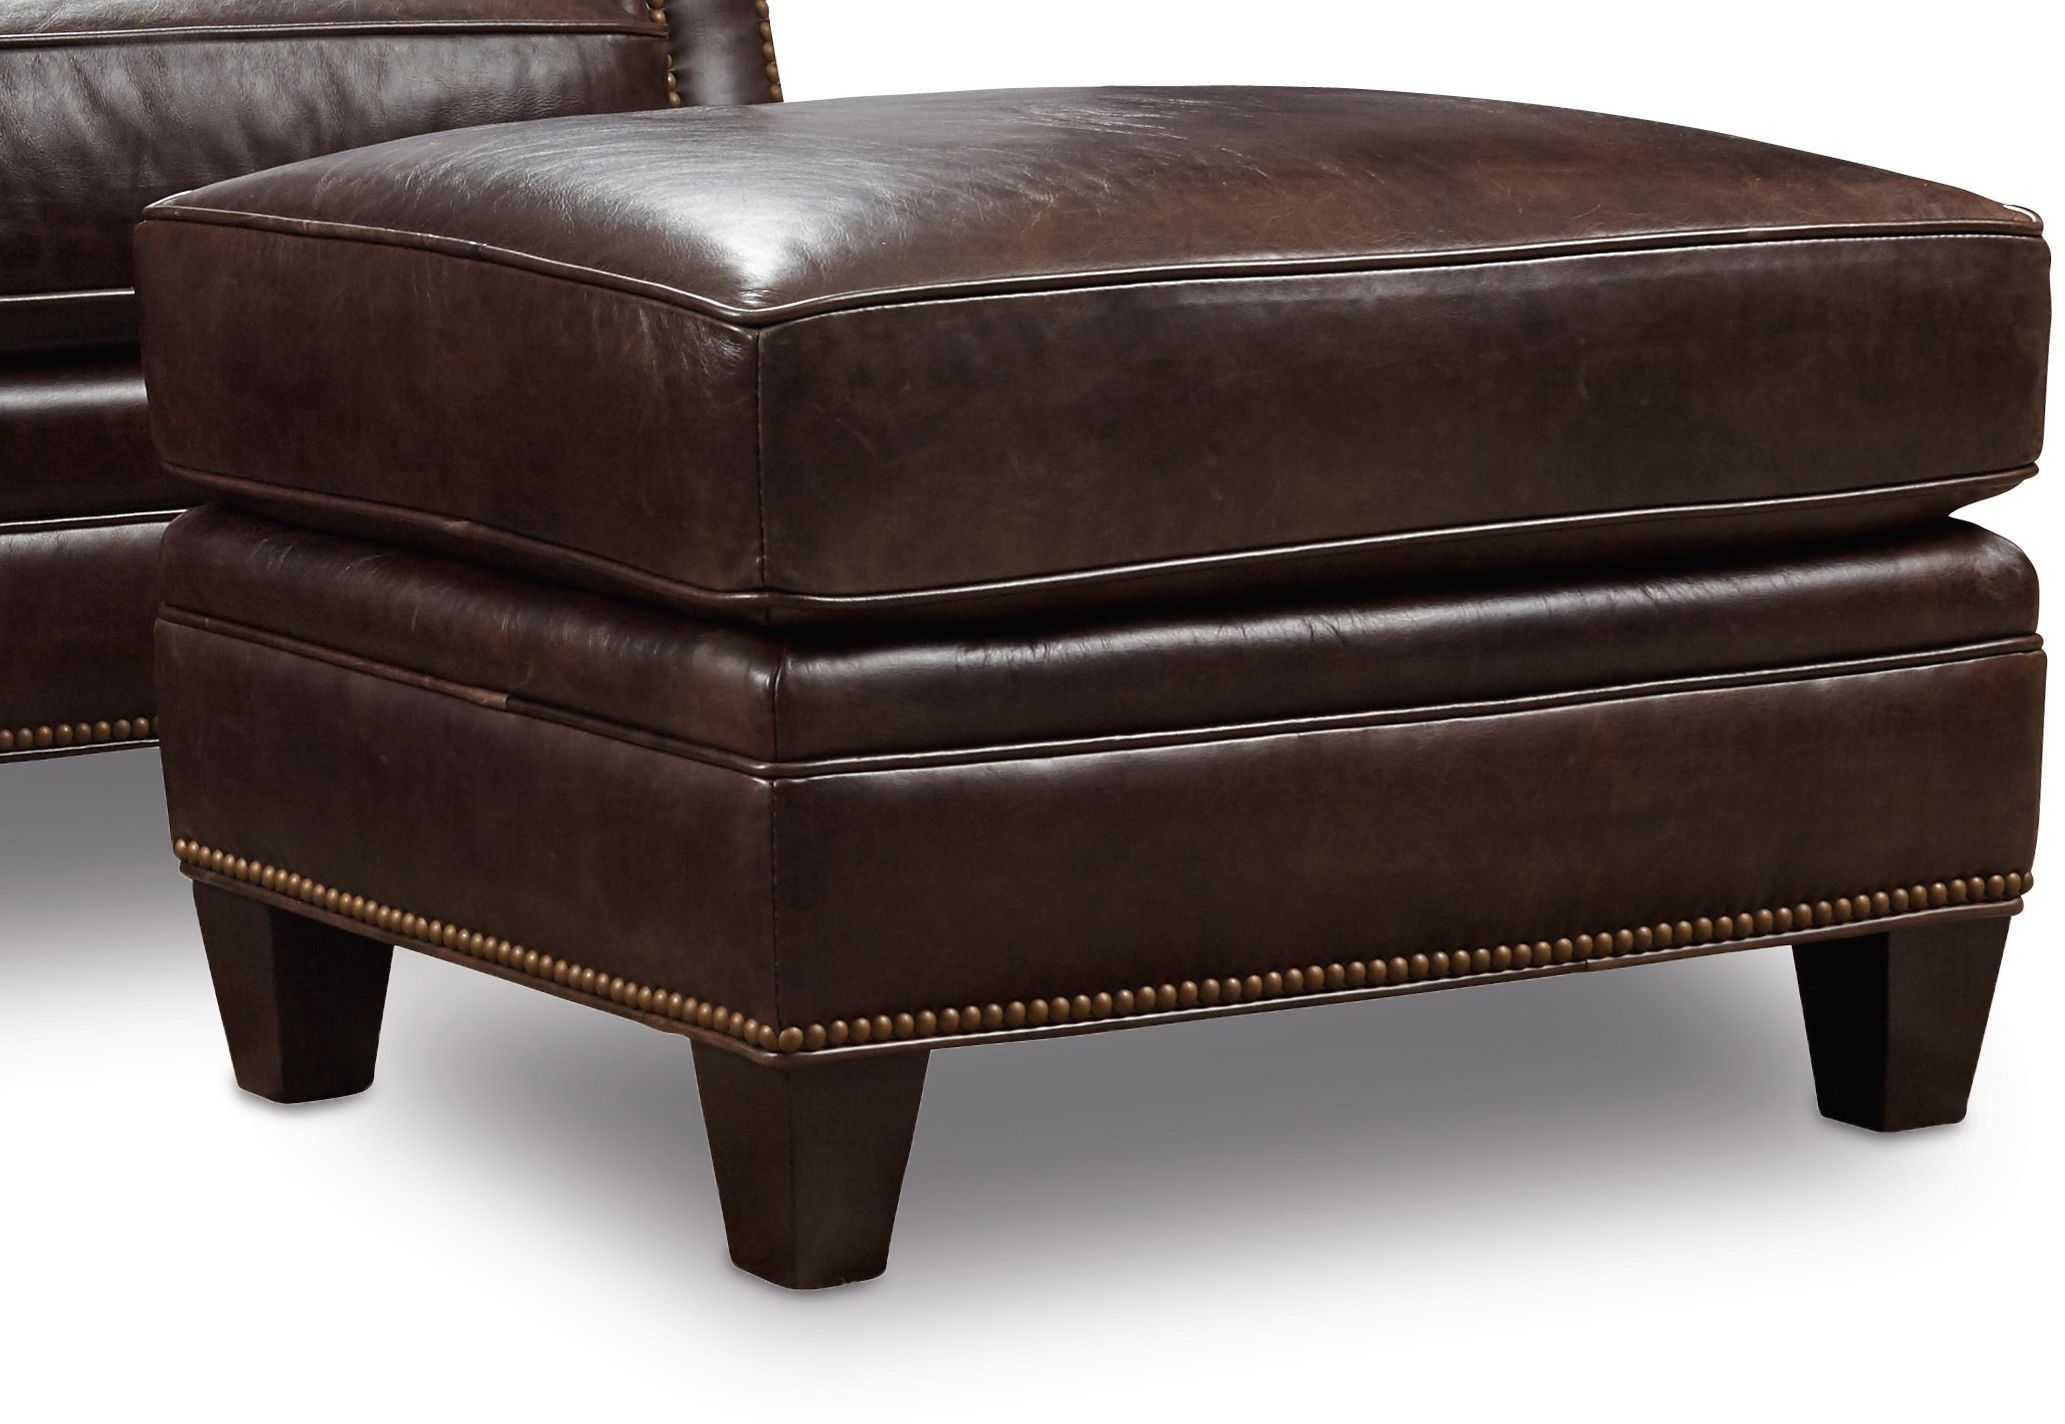 Bradshaw Brown Leather Ottoman From Hooker | Coleman Furniture In Leather Pouf Ottomans (View 8 of 20)